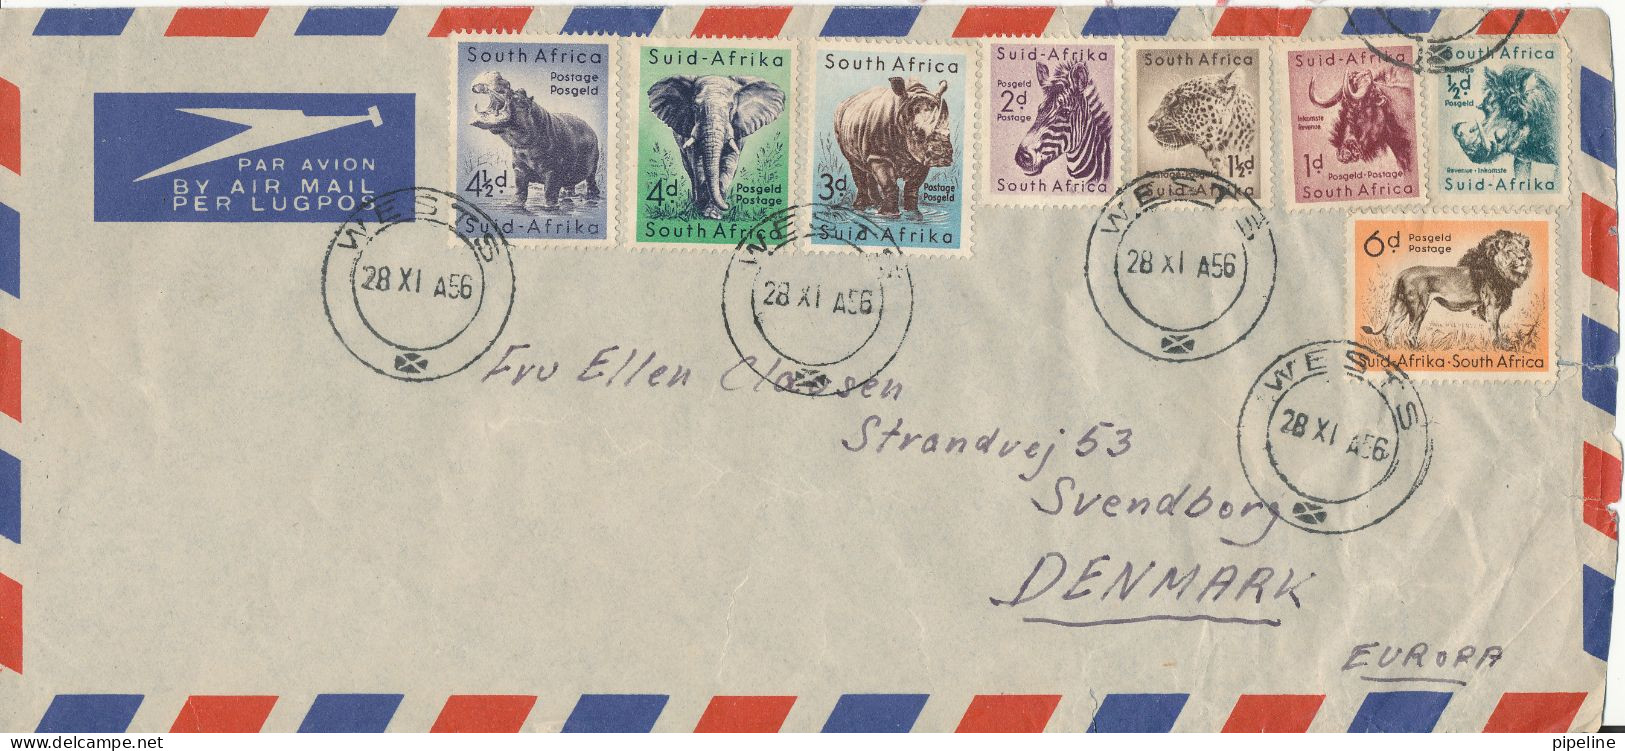 South Africa -Suid Afrika Air Mail Cover Sent To Denmark Wests 28-11-1956 With A Lot Of Topical Stamps - Posta Aerea